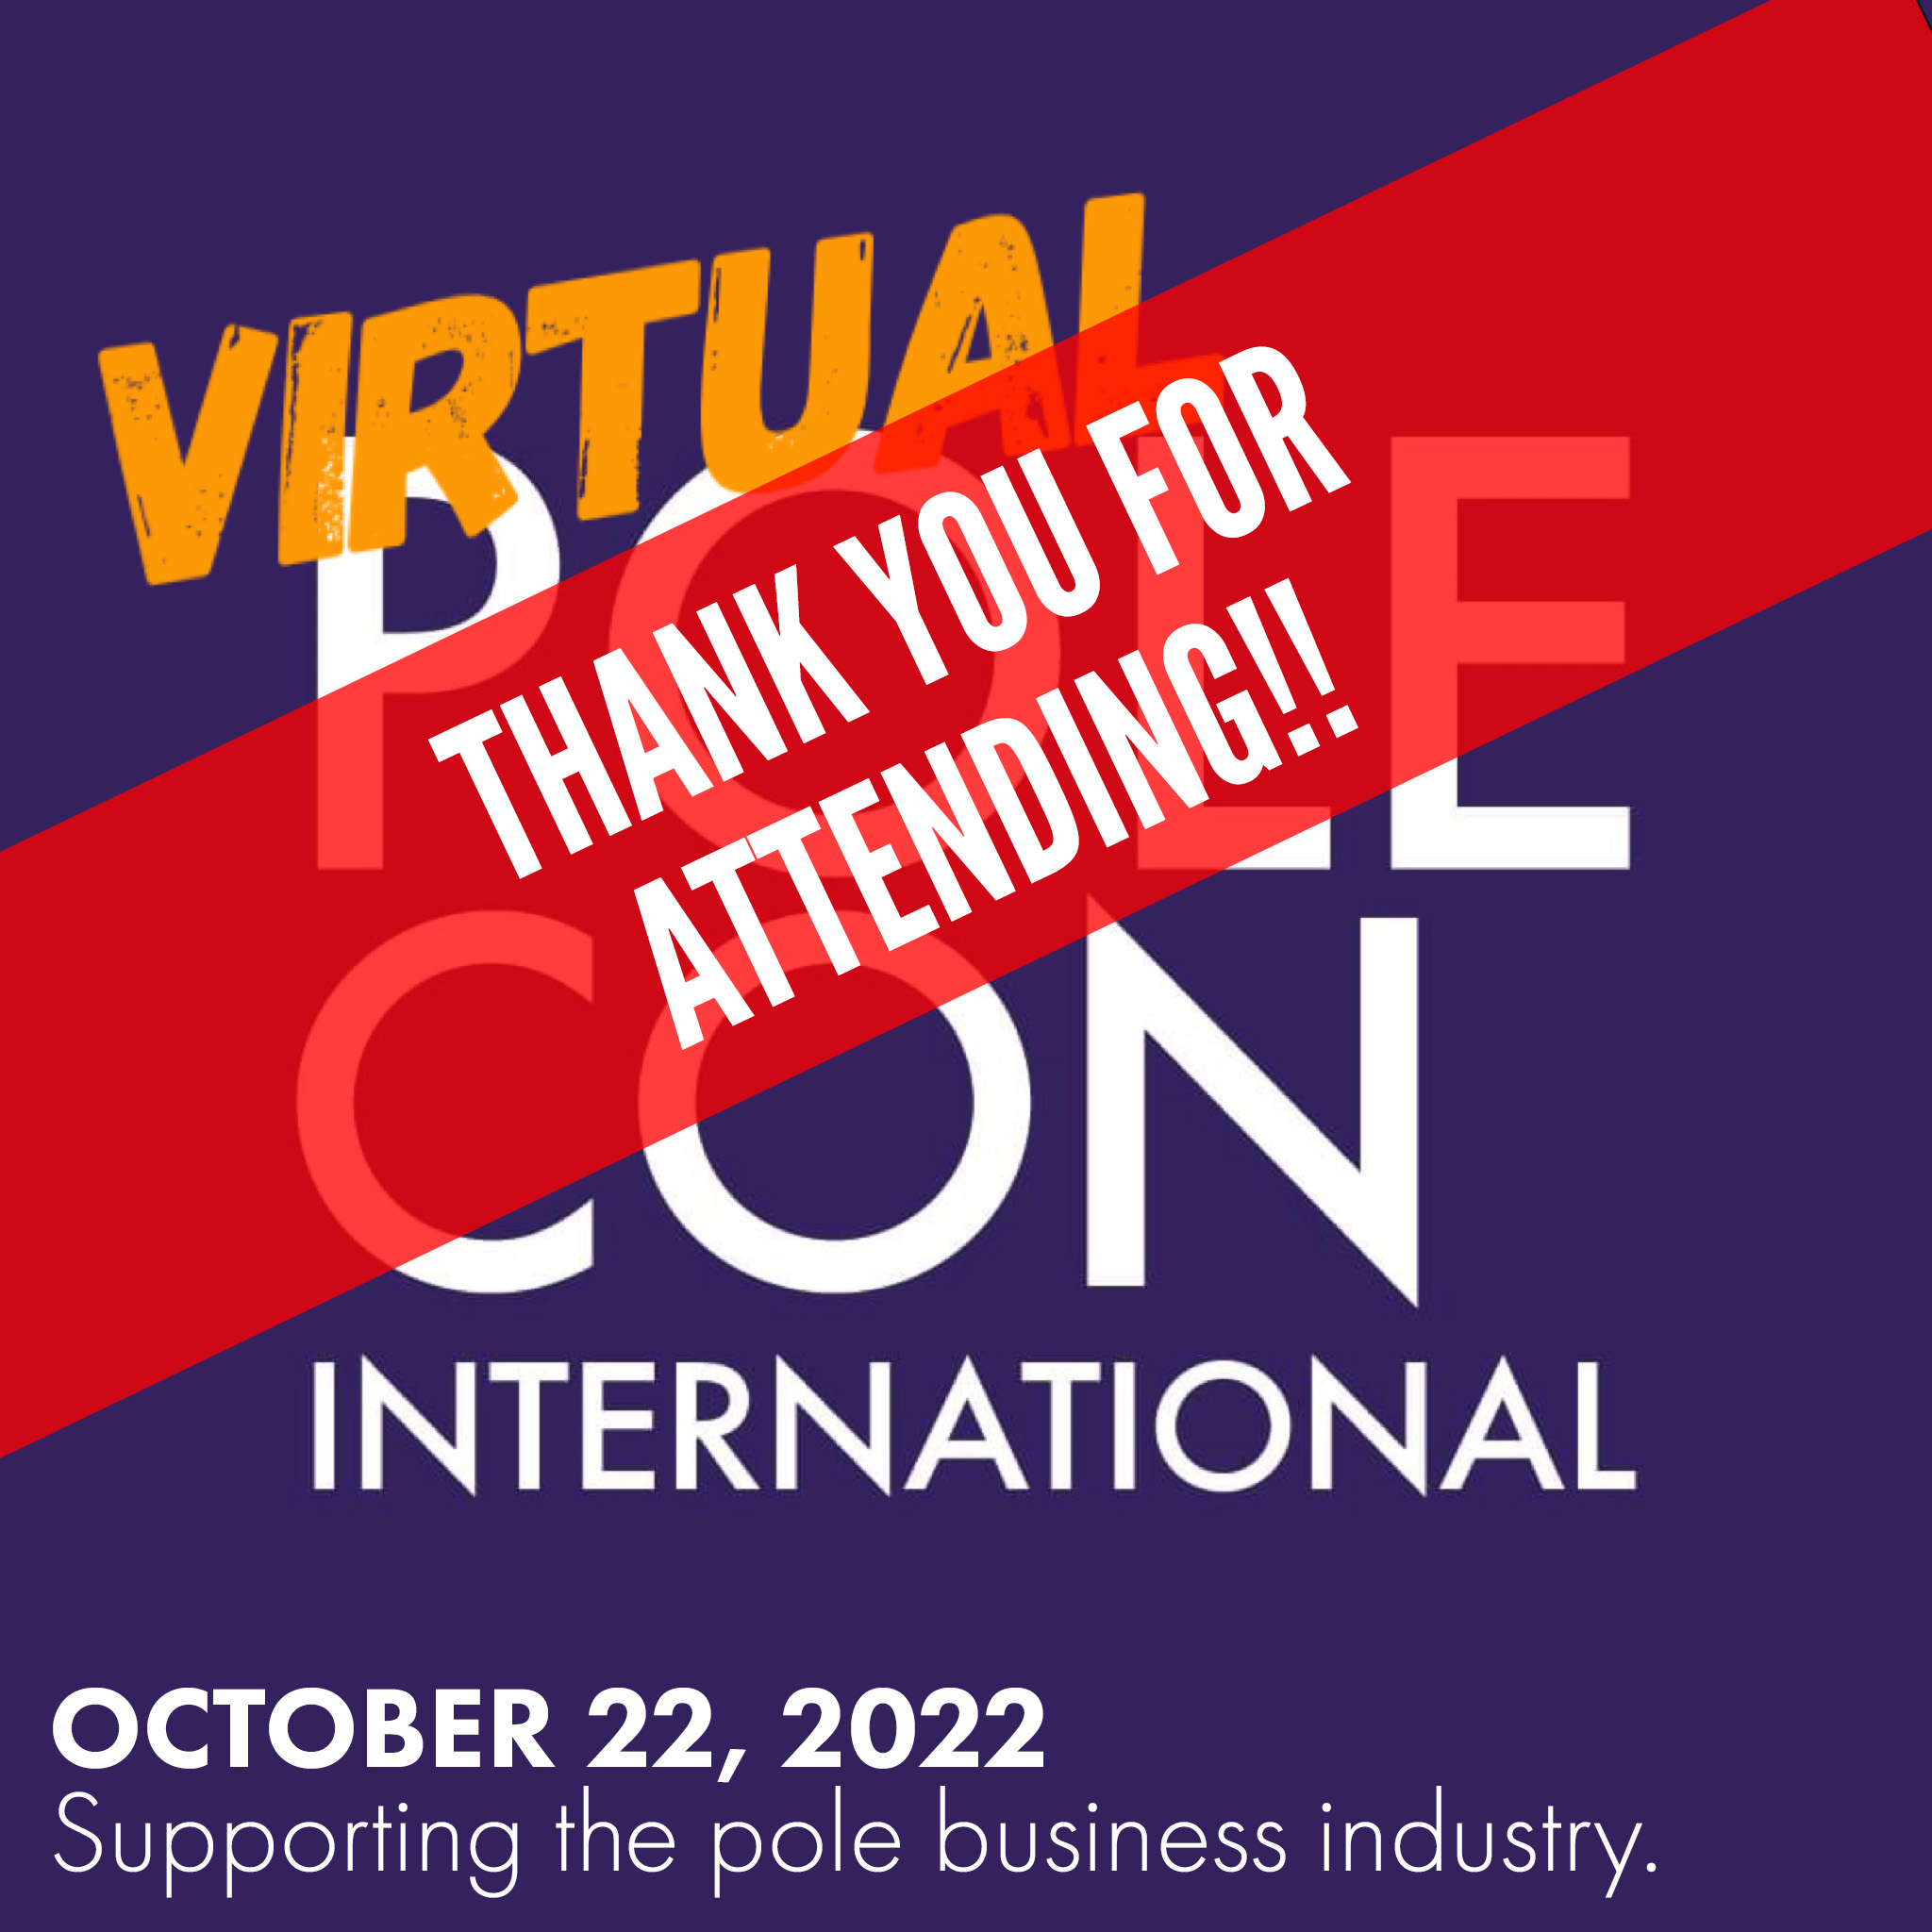 Virtual PoleCon logo with text: Thank you for attending! October 2022.